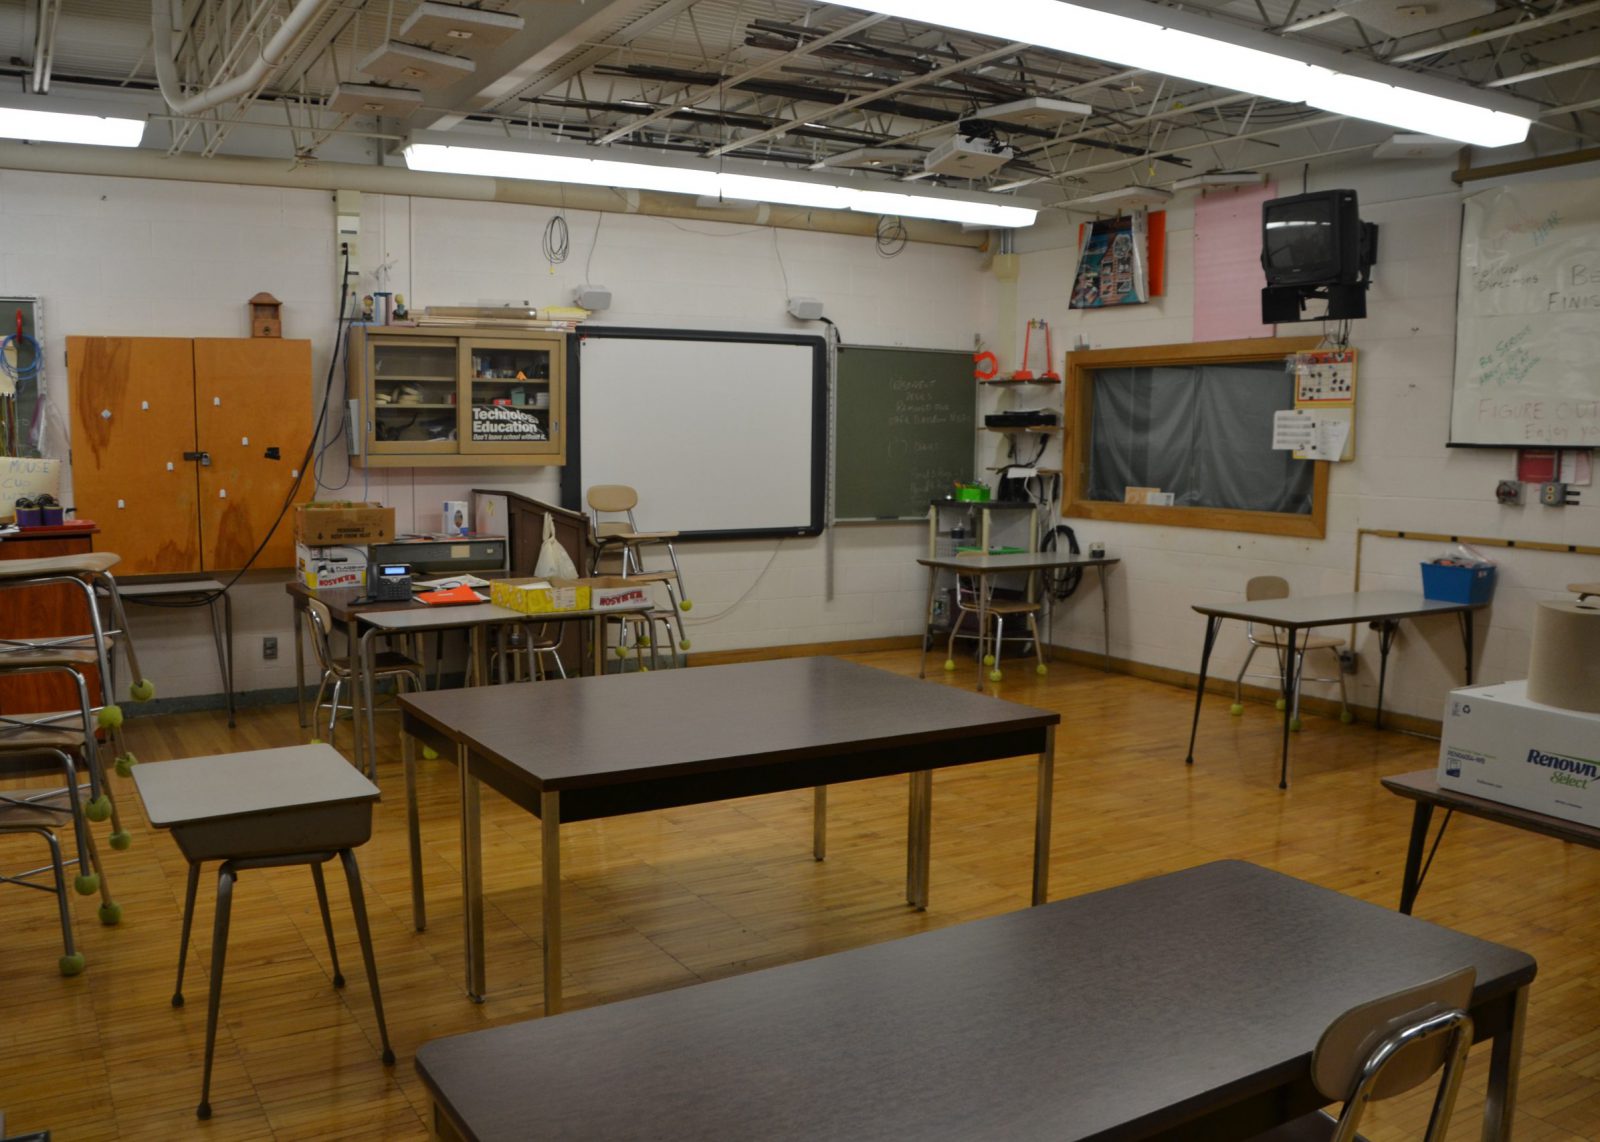 Outdated technology classroom at Iroquois